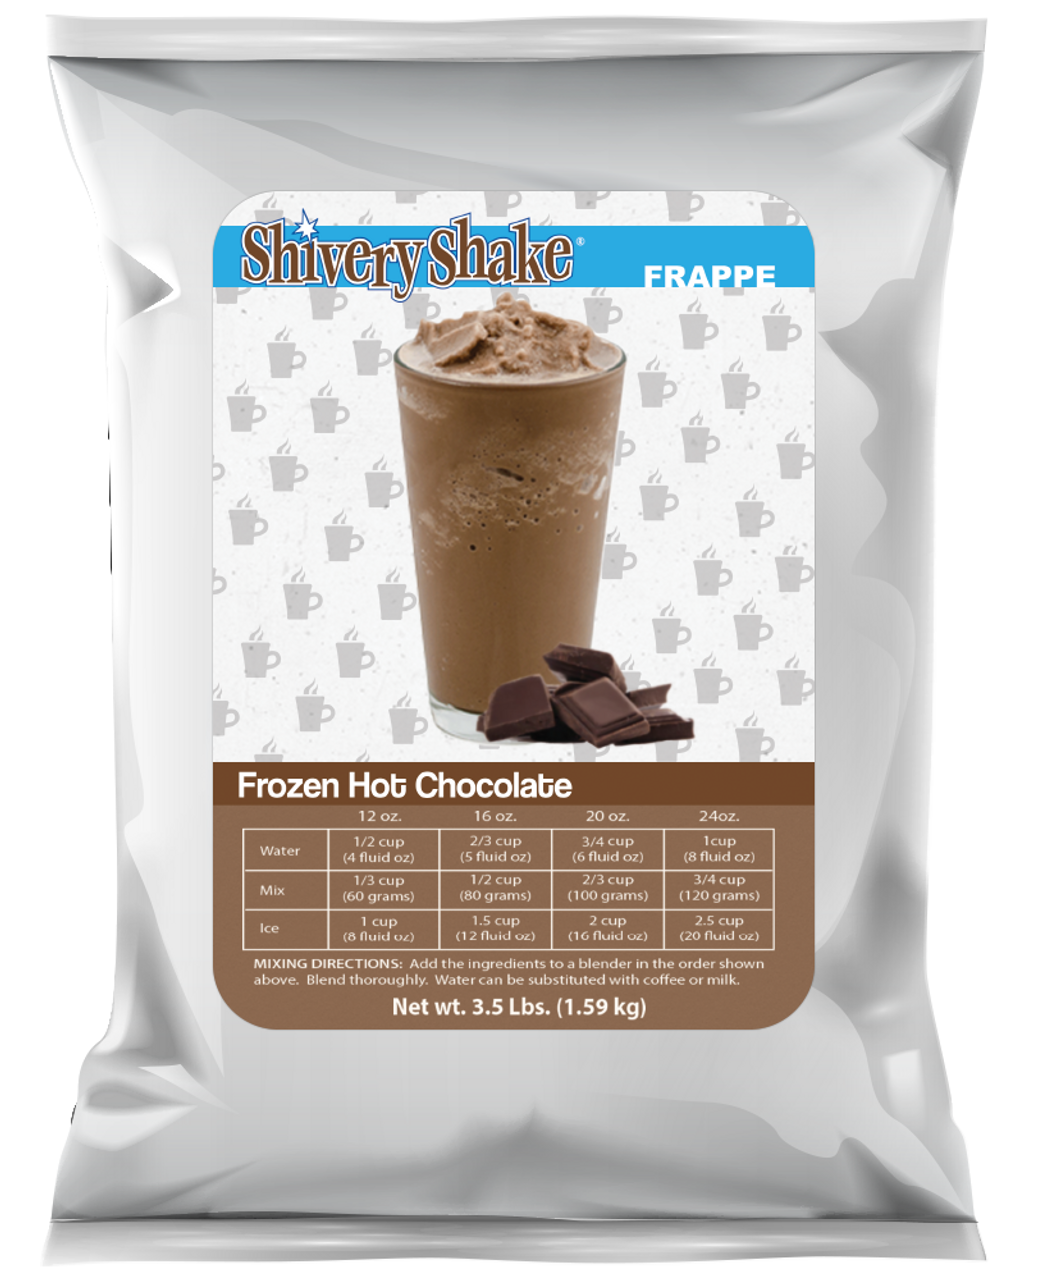 https://cdn11.bigcommerce.com/s-4d0c2/images/stencil/1280x1280/products/99/626/shivery-shake-frozen-hot-chocolate__11633.1577975843.png?c=2